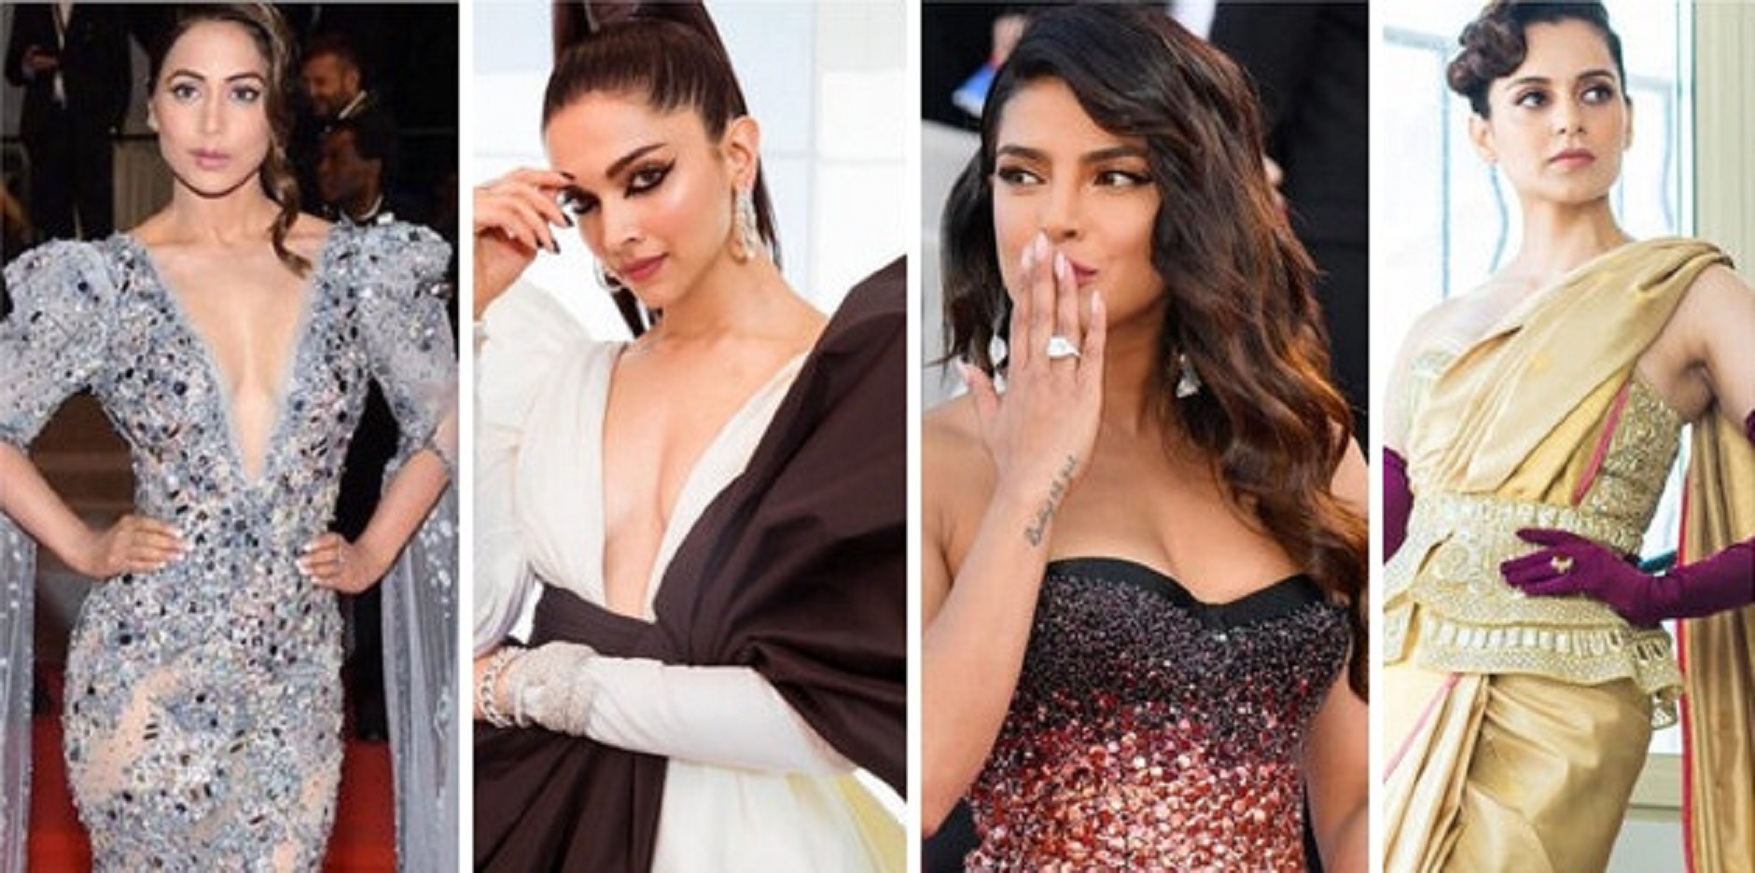 From Priyanka To Kangana: All Stunning Looks Of B-Town Beauties So Far From Cannes 2019